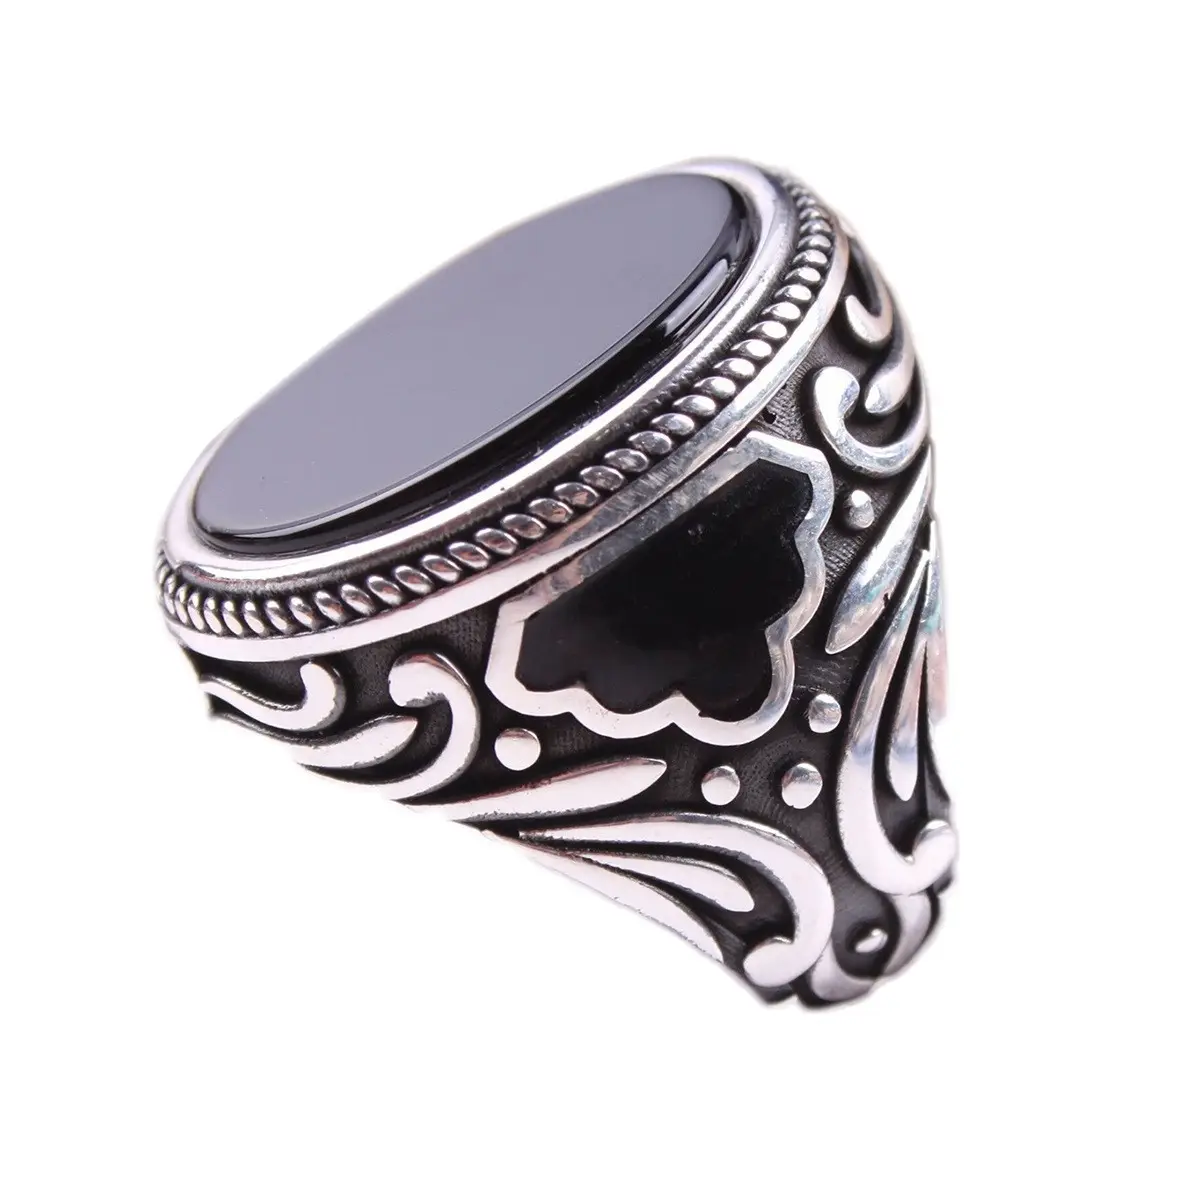 Punk Turquoise Signet Turkish Rings Islamic Religious Muslim Jewelry Fashion Dainty Gem Natural Black Onyx Ring for Men